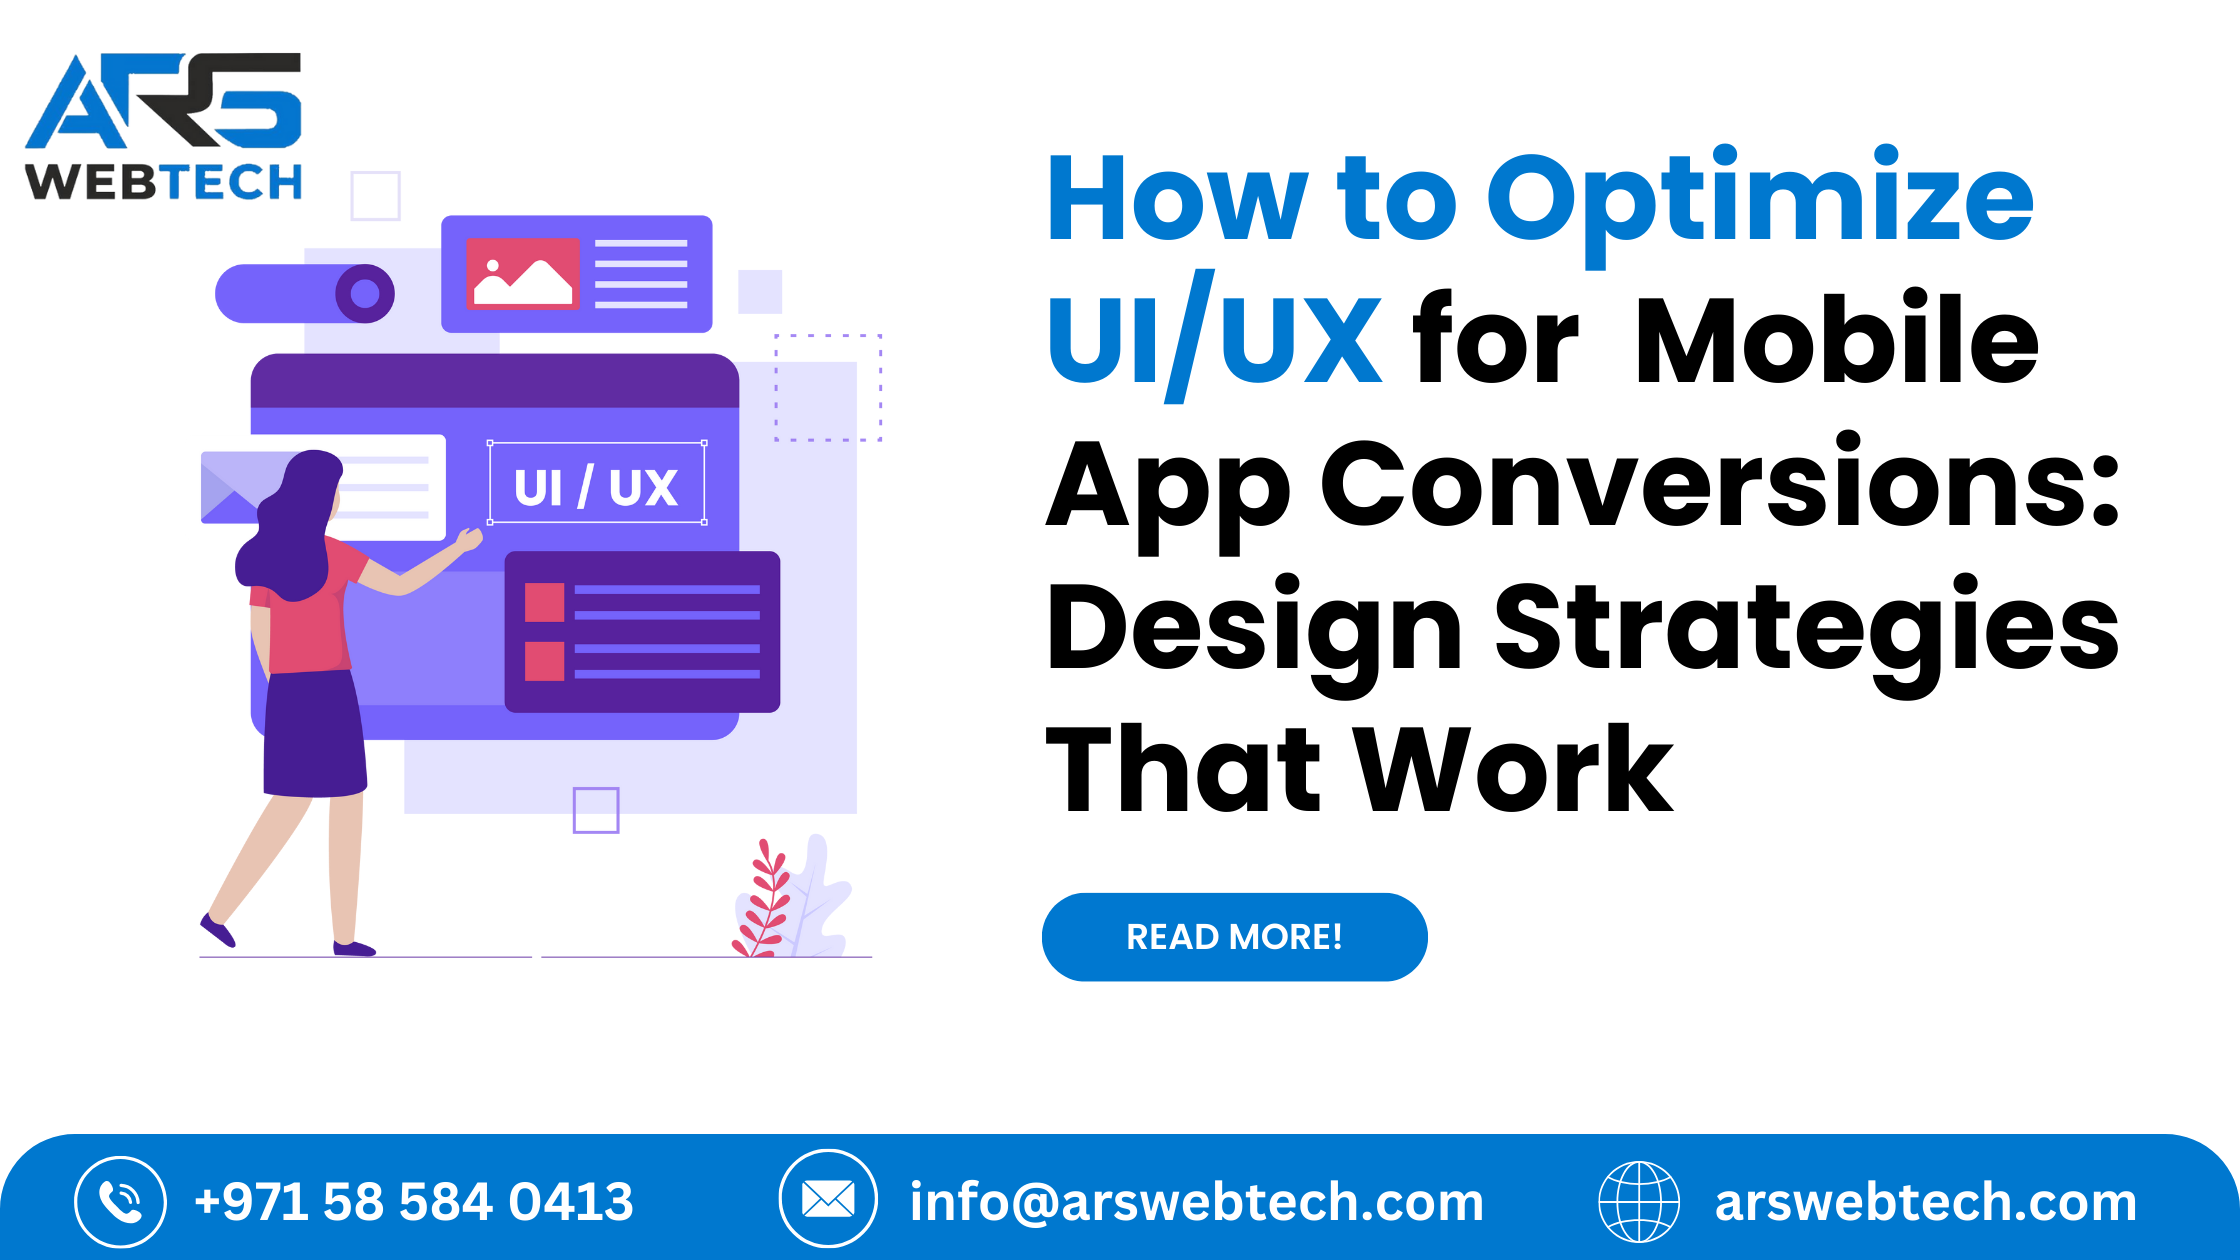 How to Optimize UI/UX for Mobile App Conversions: Design Strategies That Work